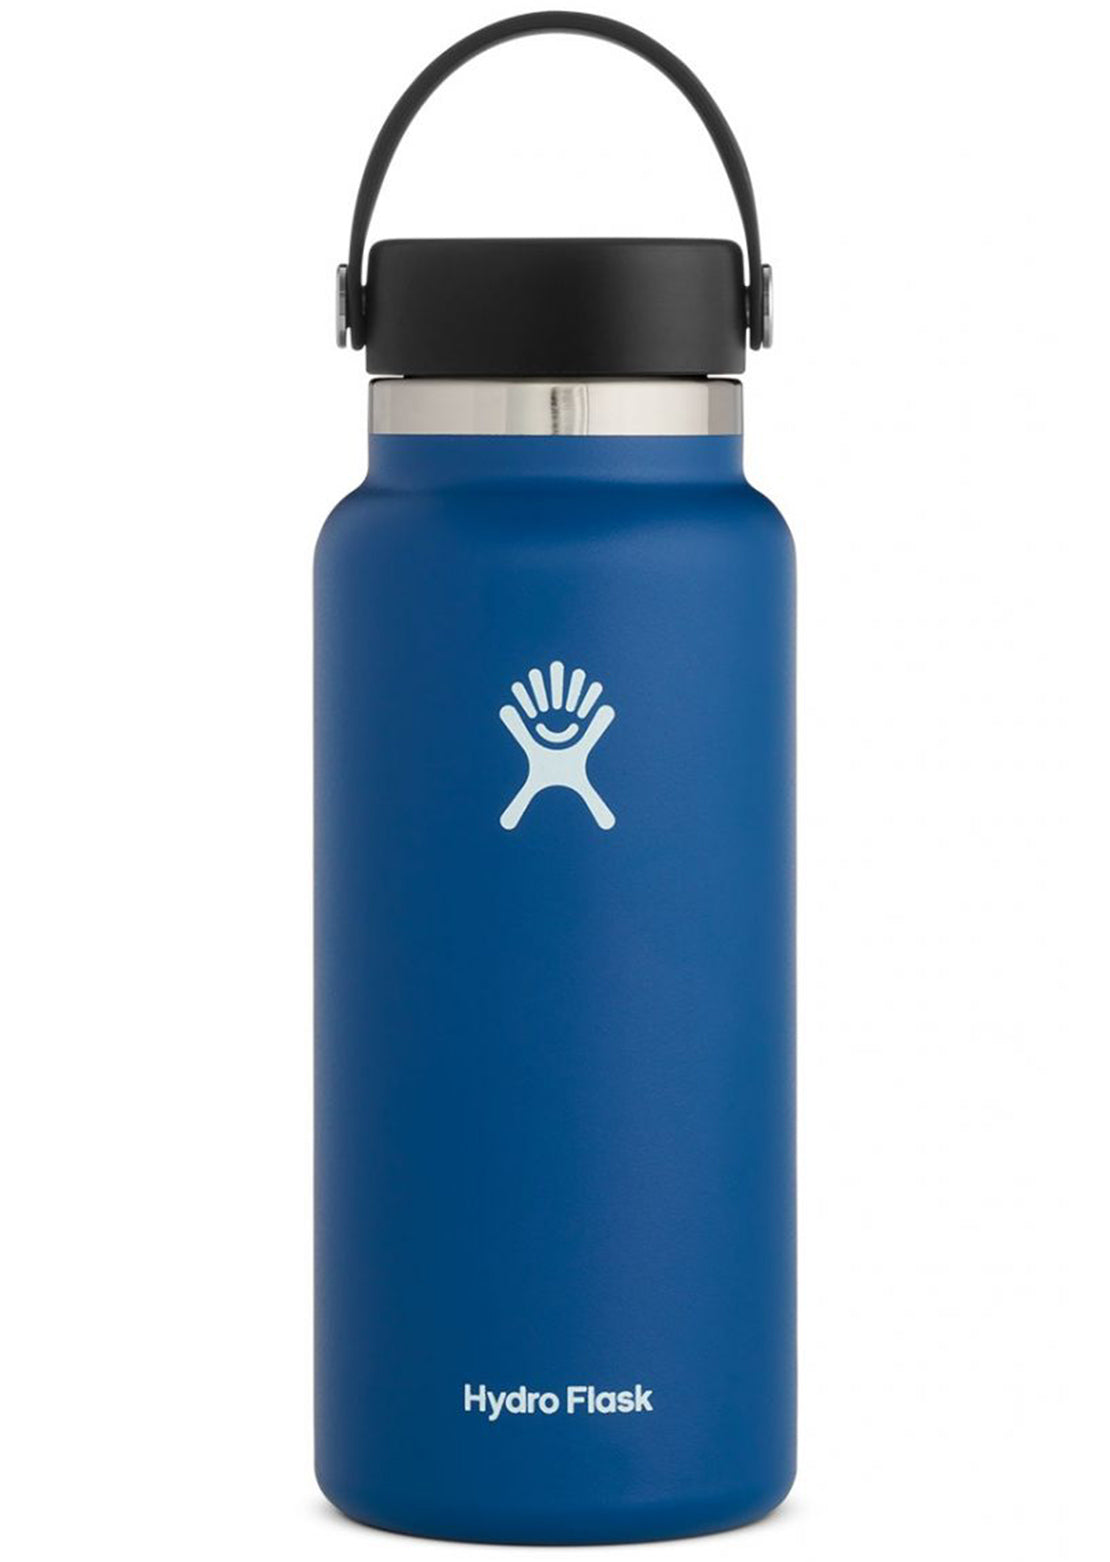 Hydro Flask 32oz Wide Mouth Insulated Bottle Cobalt